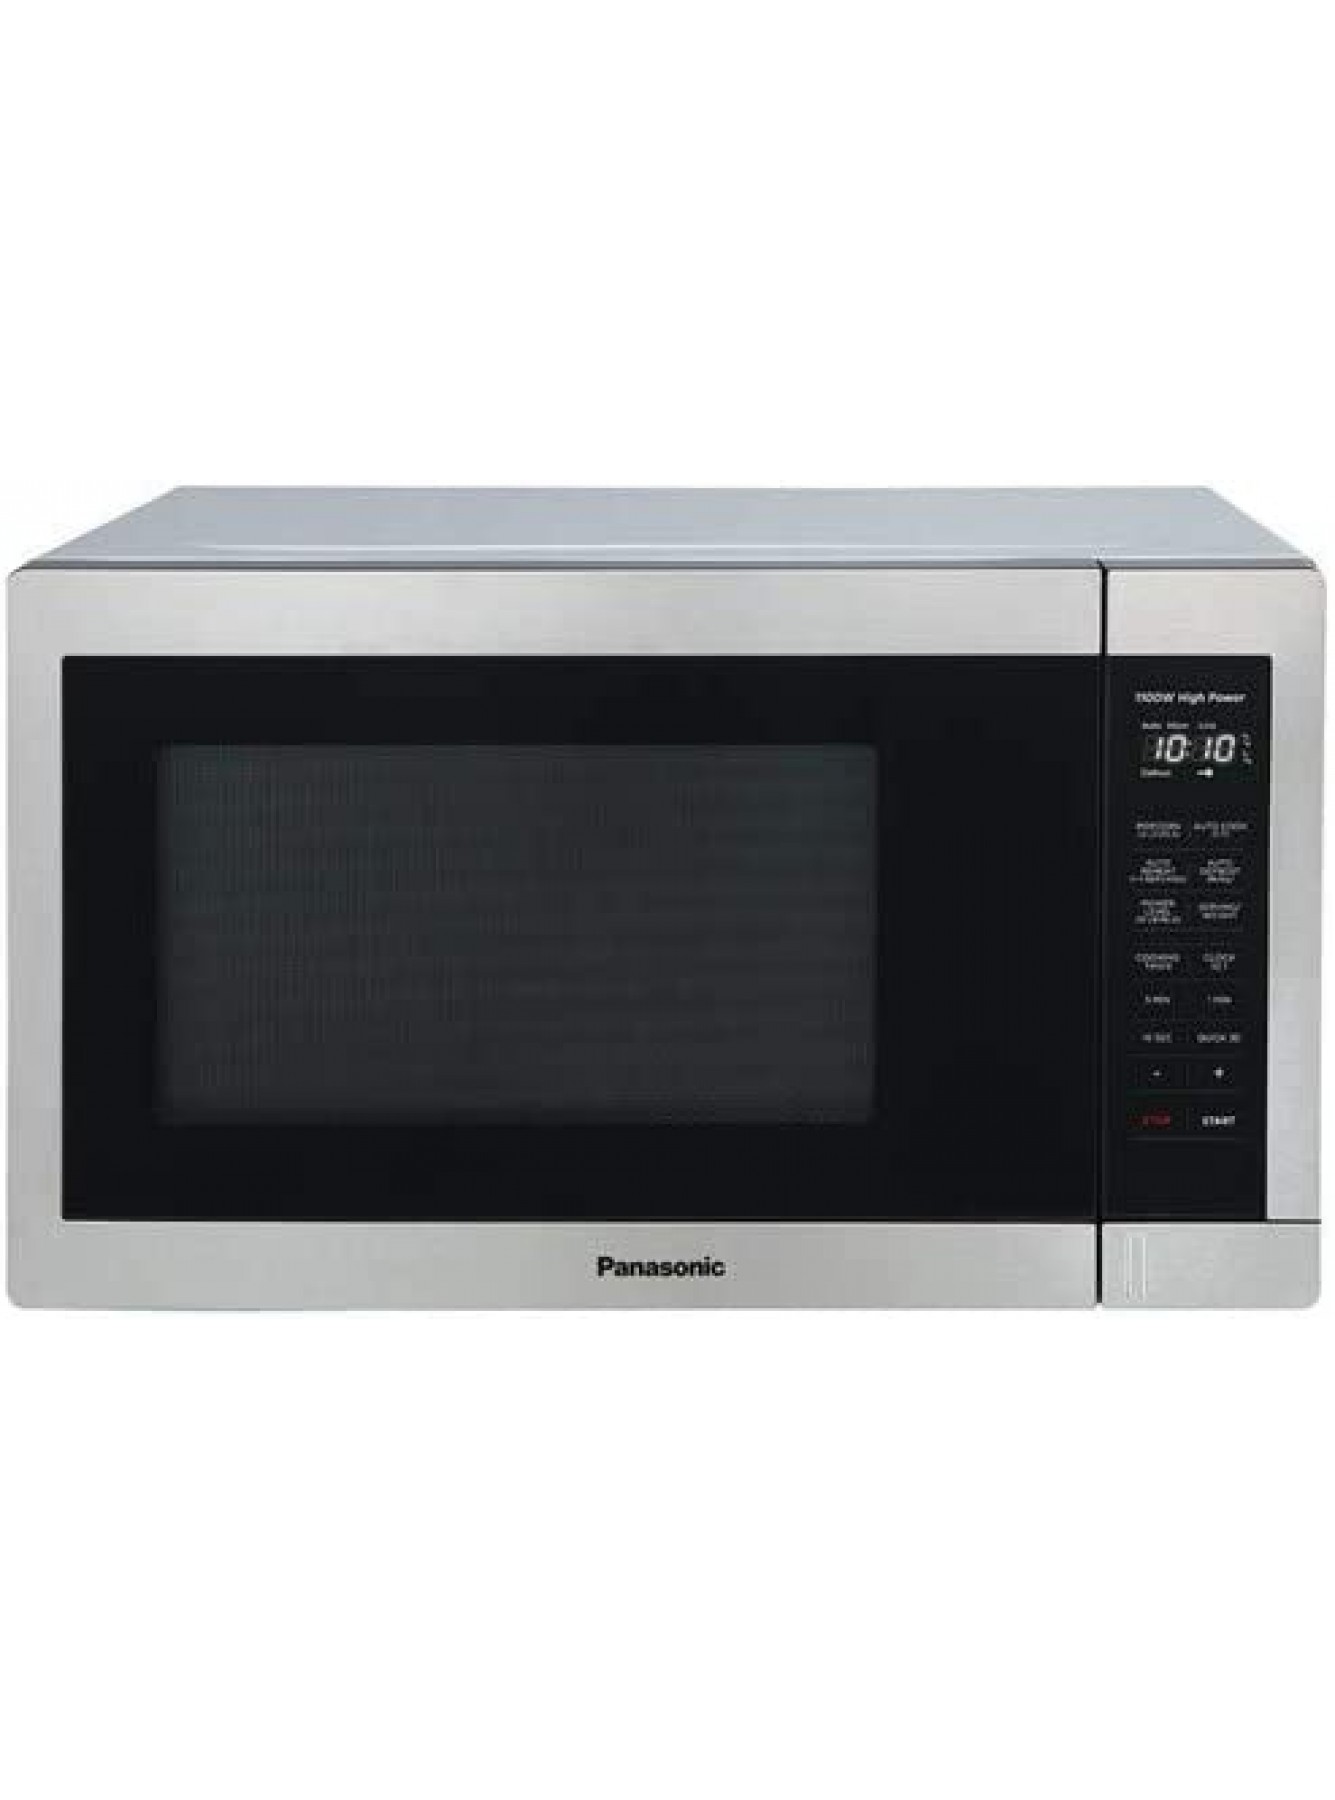 Panasonic NN-SB658S is a 1.3 Cu Ft 1100W Cooking Power Smart Touch Controls Turbo Defrost Countertop Microwave Oven Renewed B08HZDGZM1